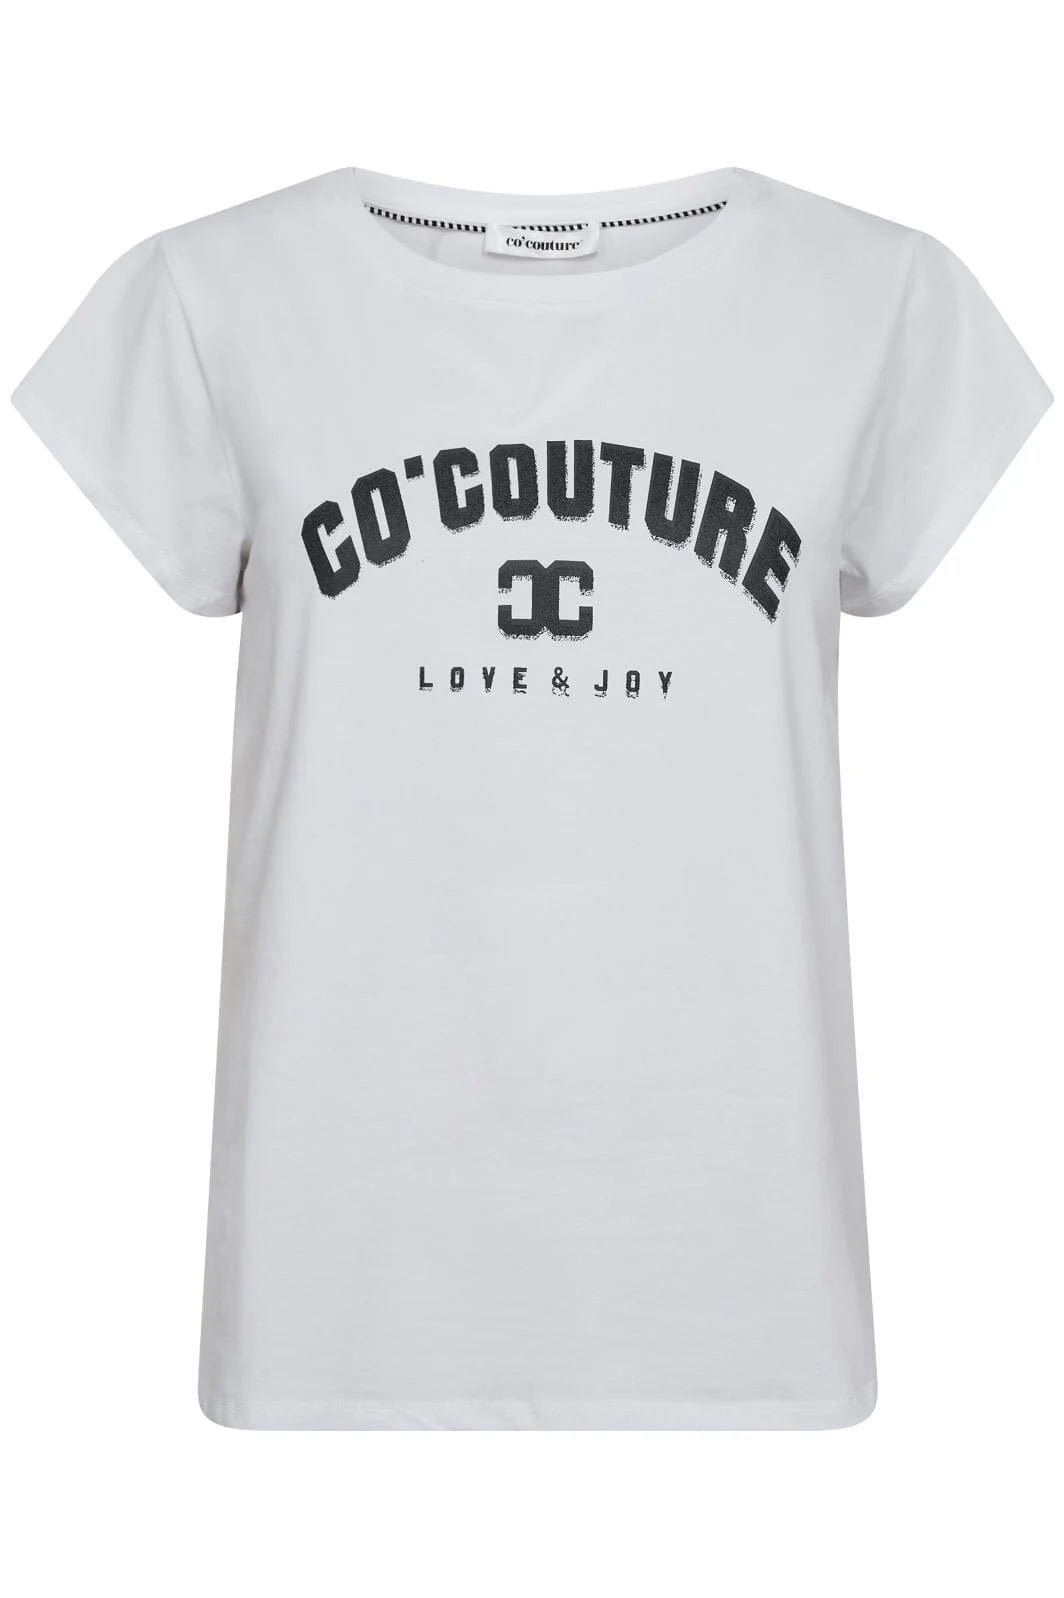 Co'Couture DustCC Print Tee